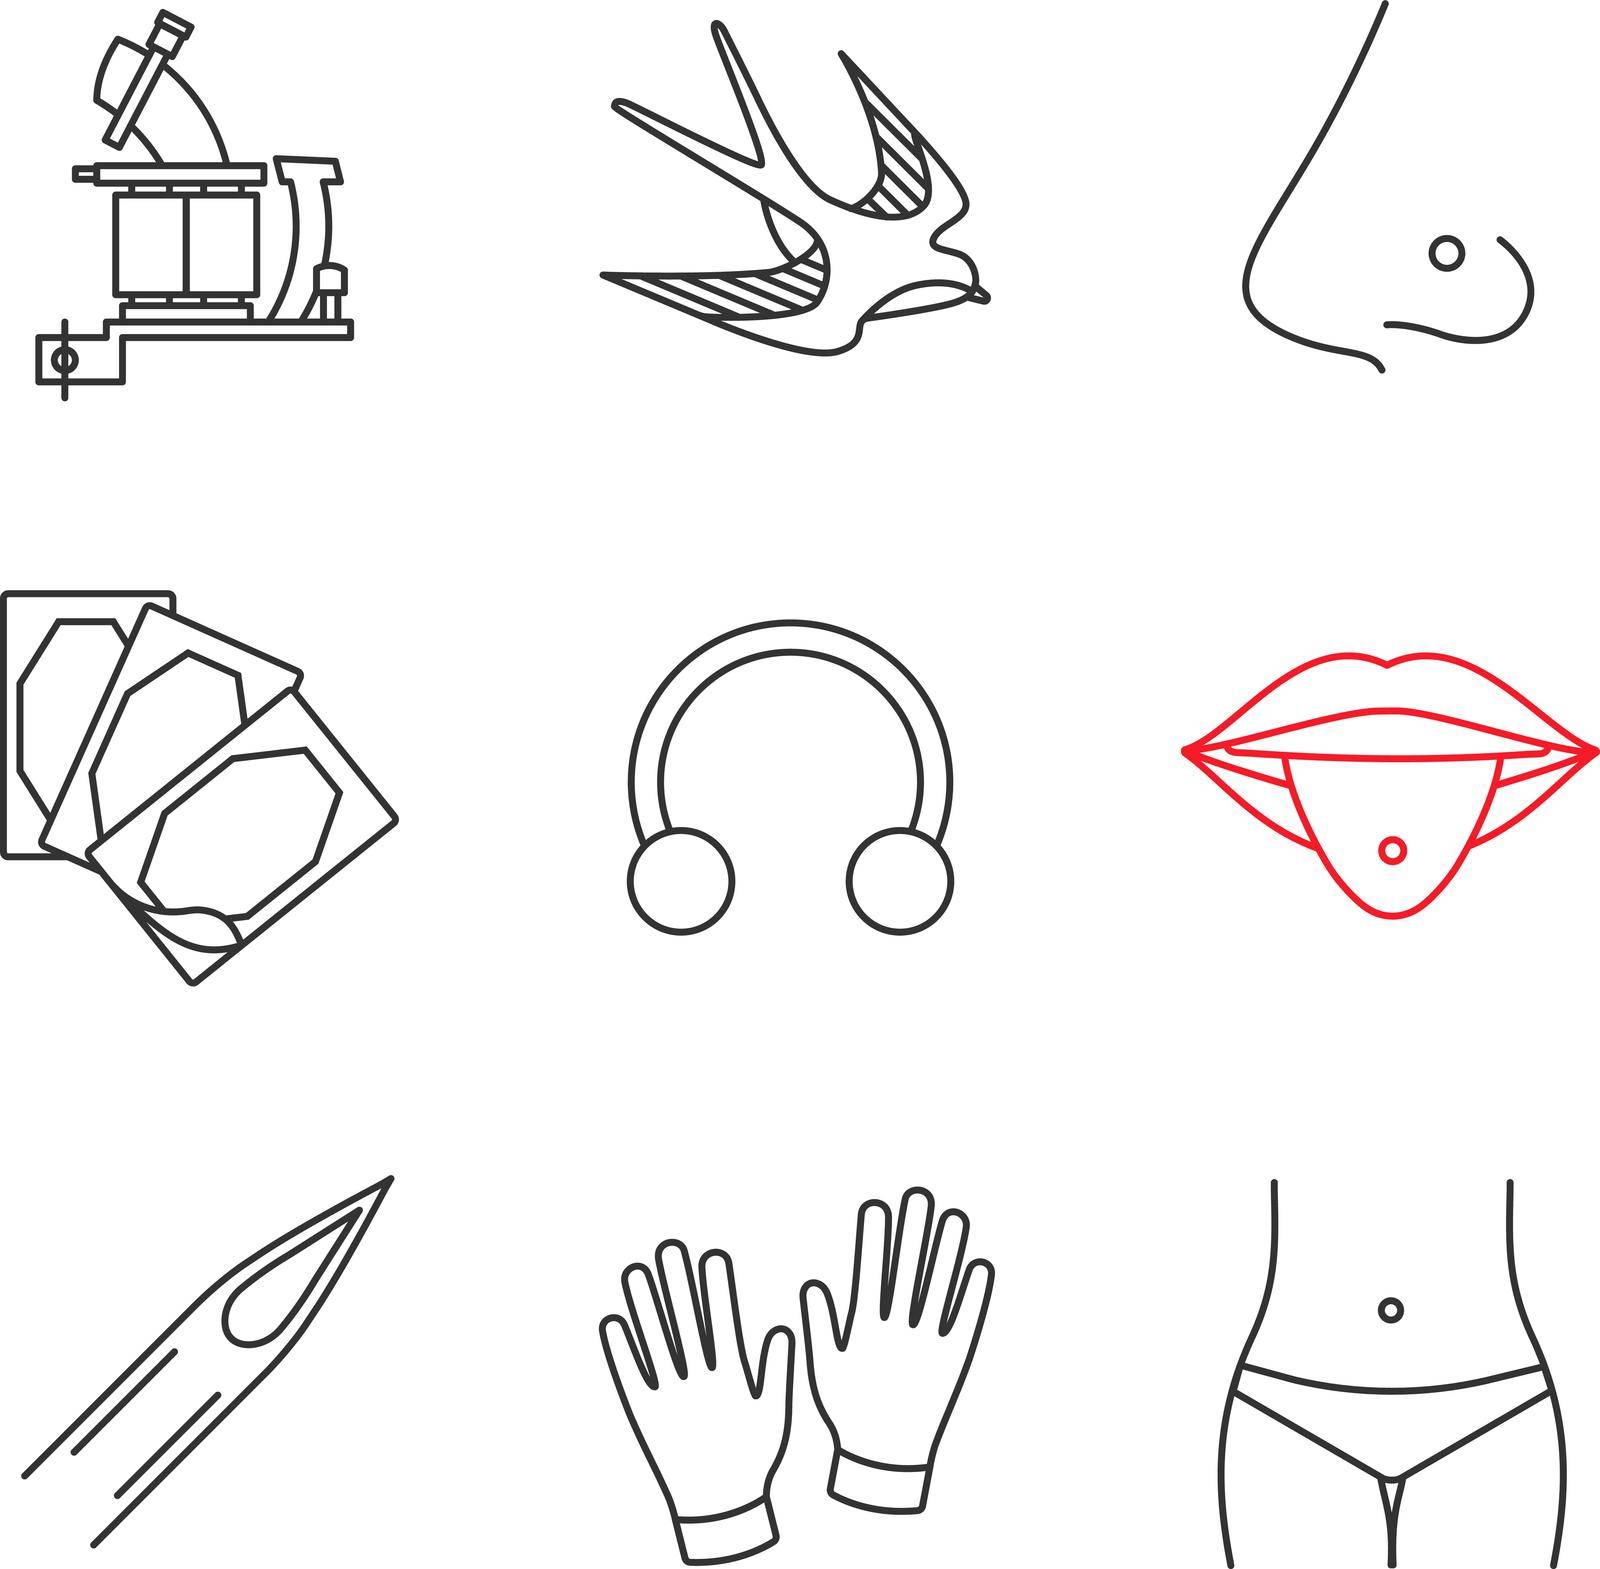 Tattoo studio linear icons set. Tattoo machine, swallow, pierced nose and tongue, plaster, ring, needle, medical gloves, piercing. Thin line contour symbols. Isolated vector outline illustrations